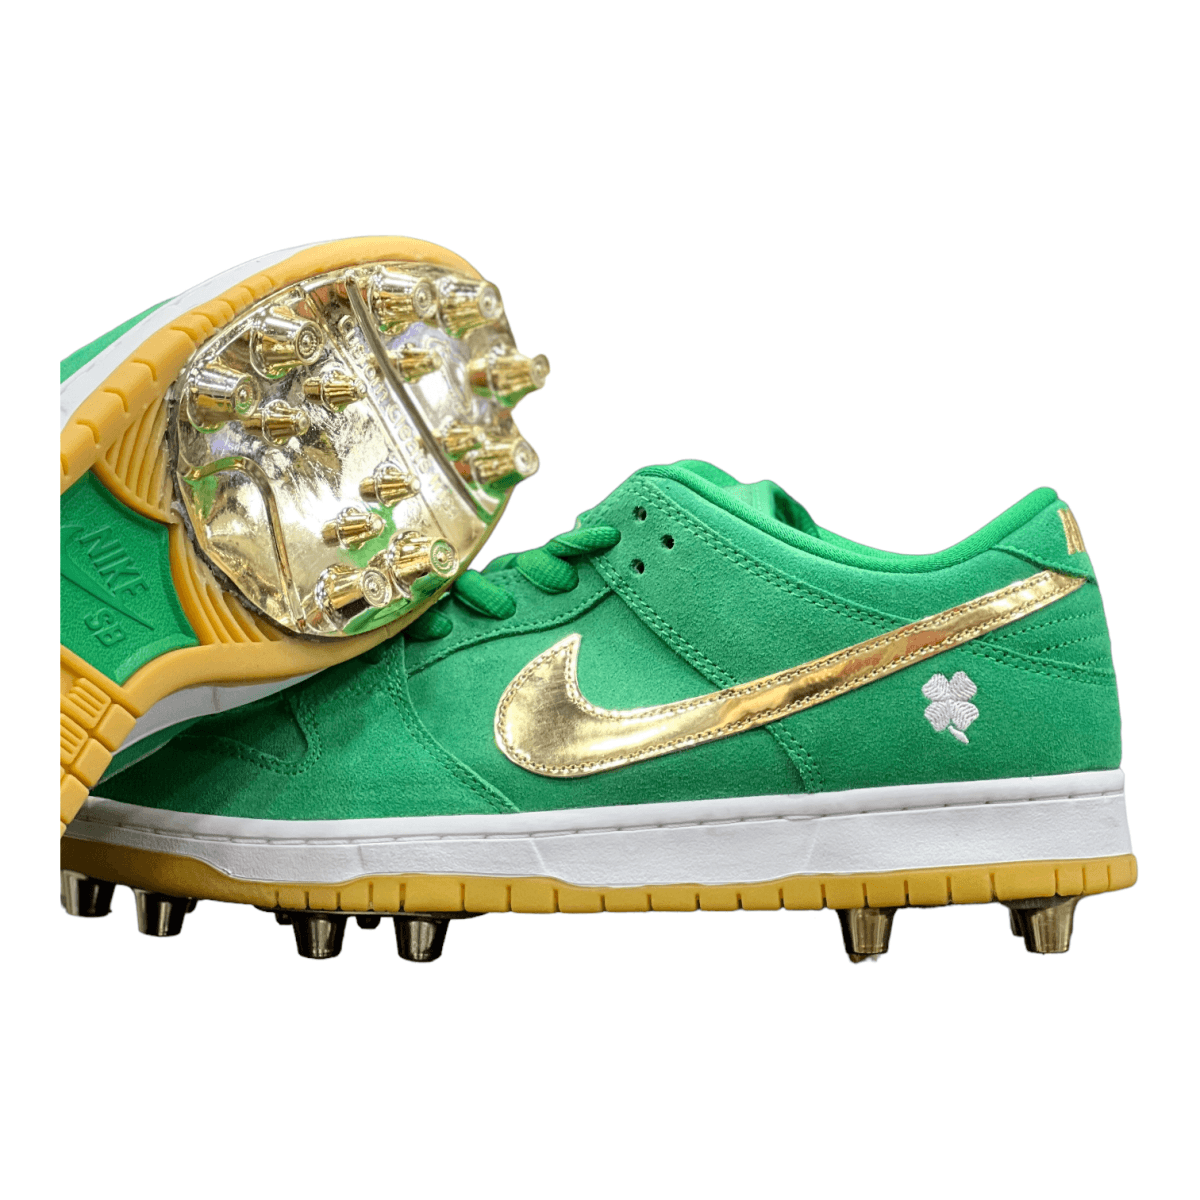 SB Dunk Low Pro St. Patrick's Day Custom Football or Baseball Cleat - Low Sneaker - Custom Cleats - Jawns on Fire